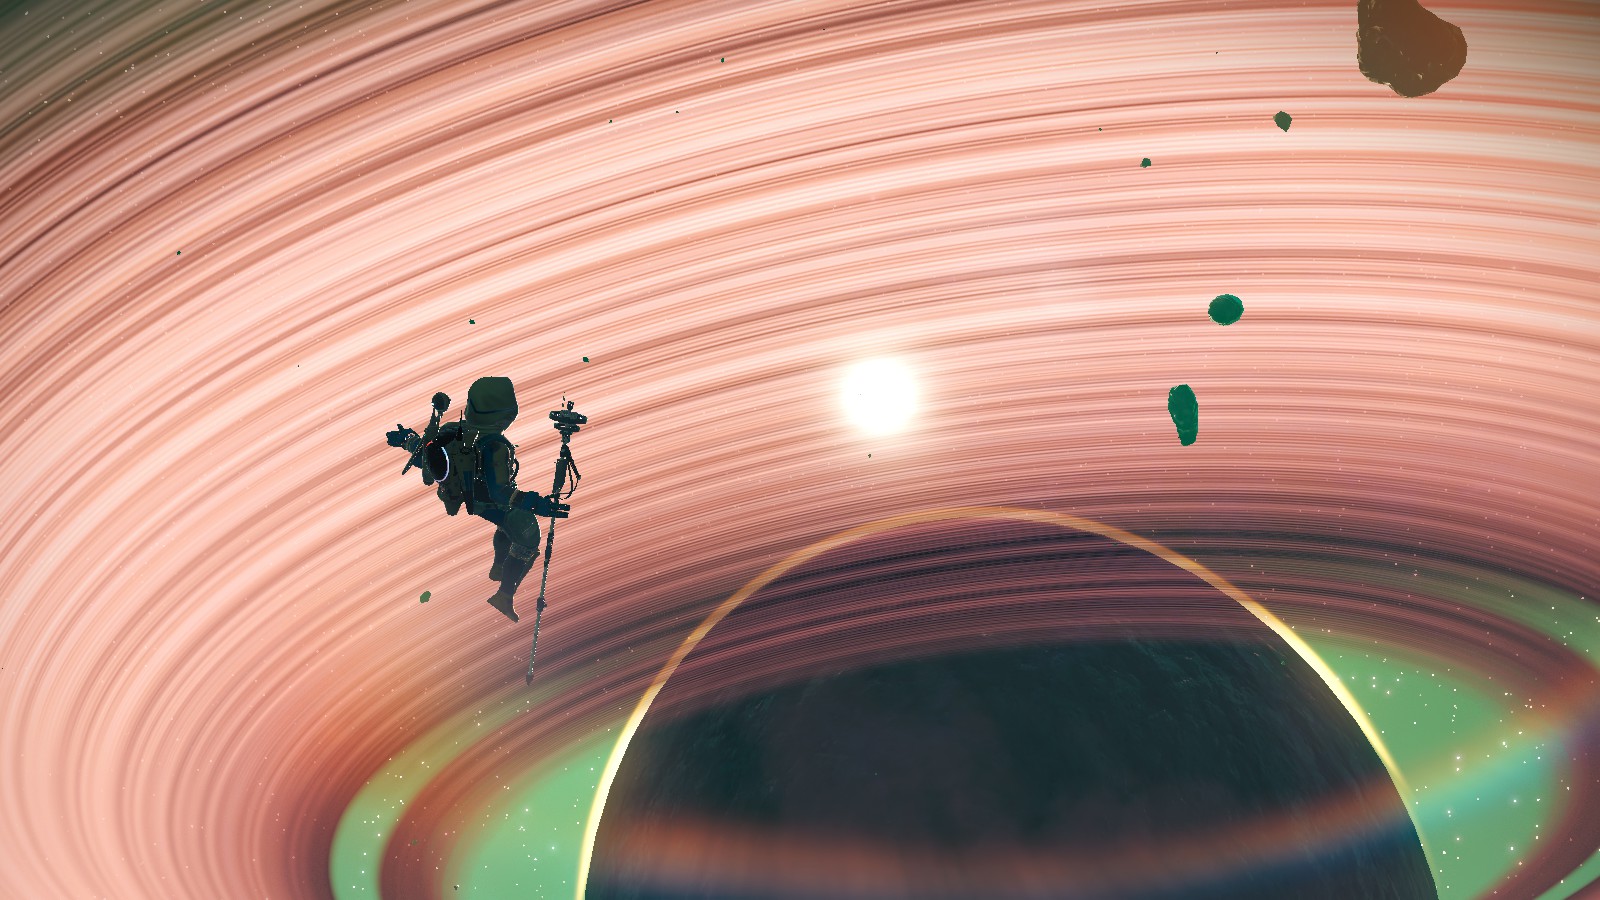 No Man's Sky, floating high above a ringed planet